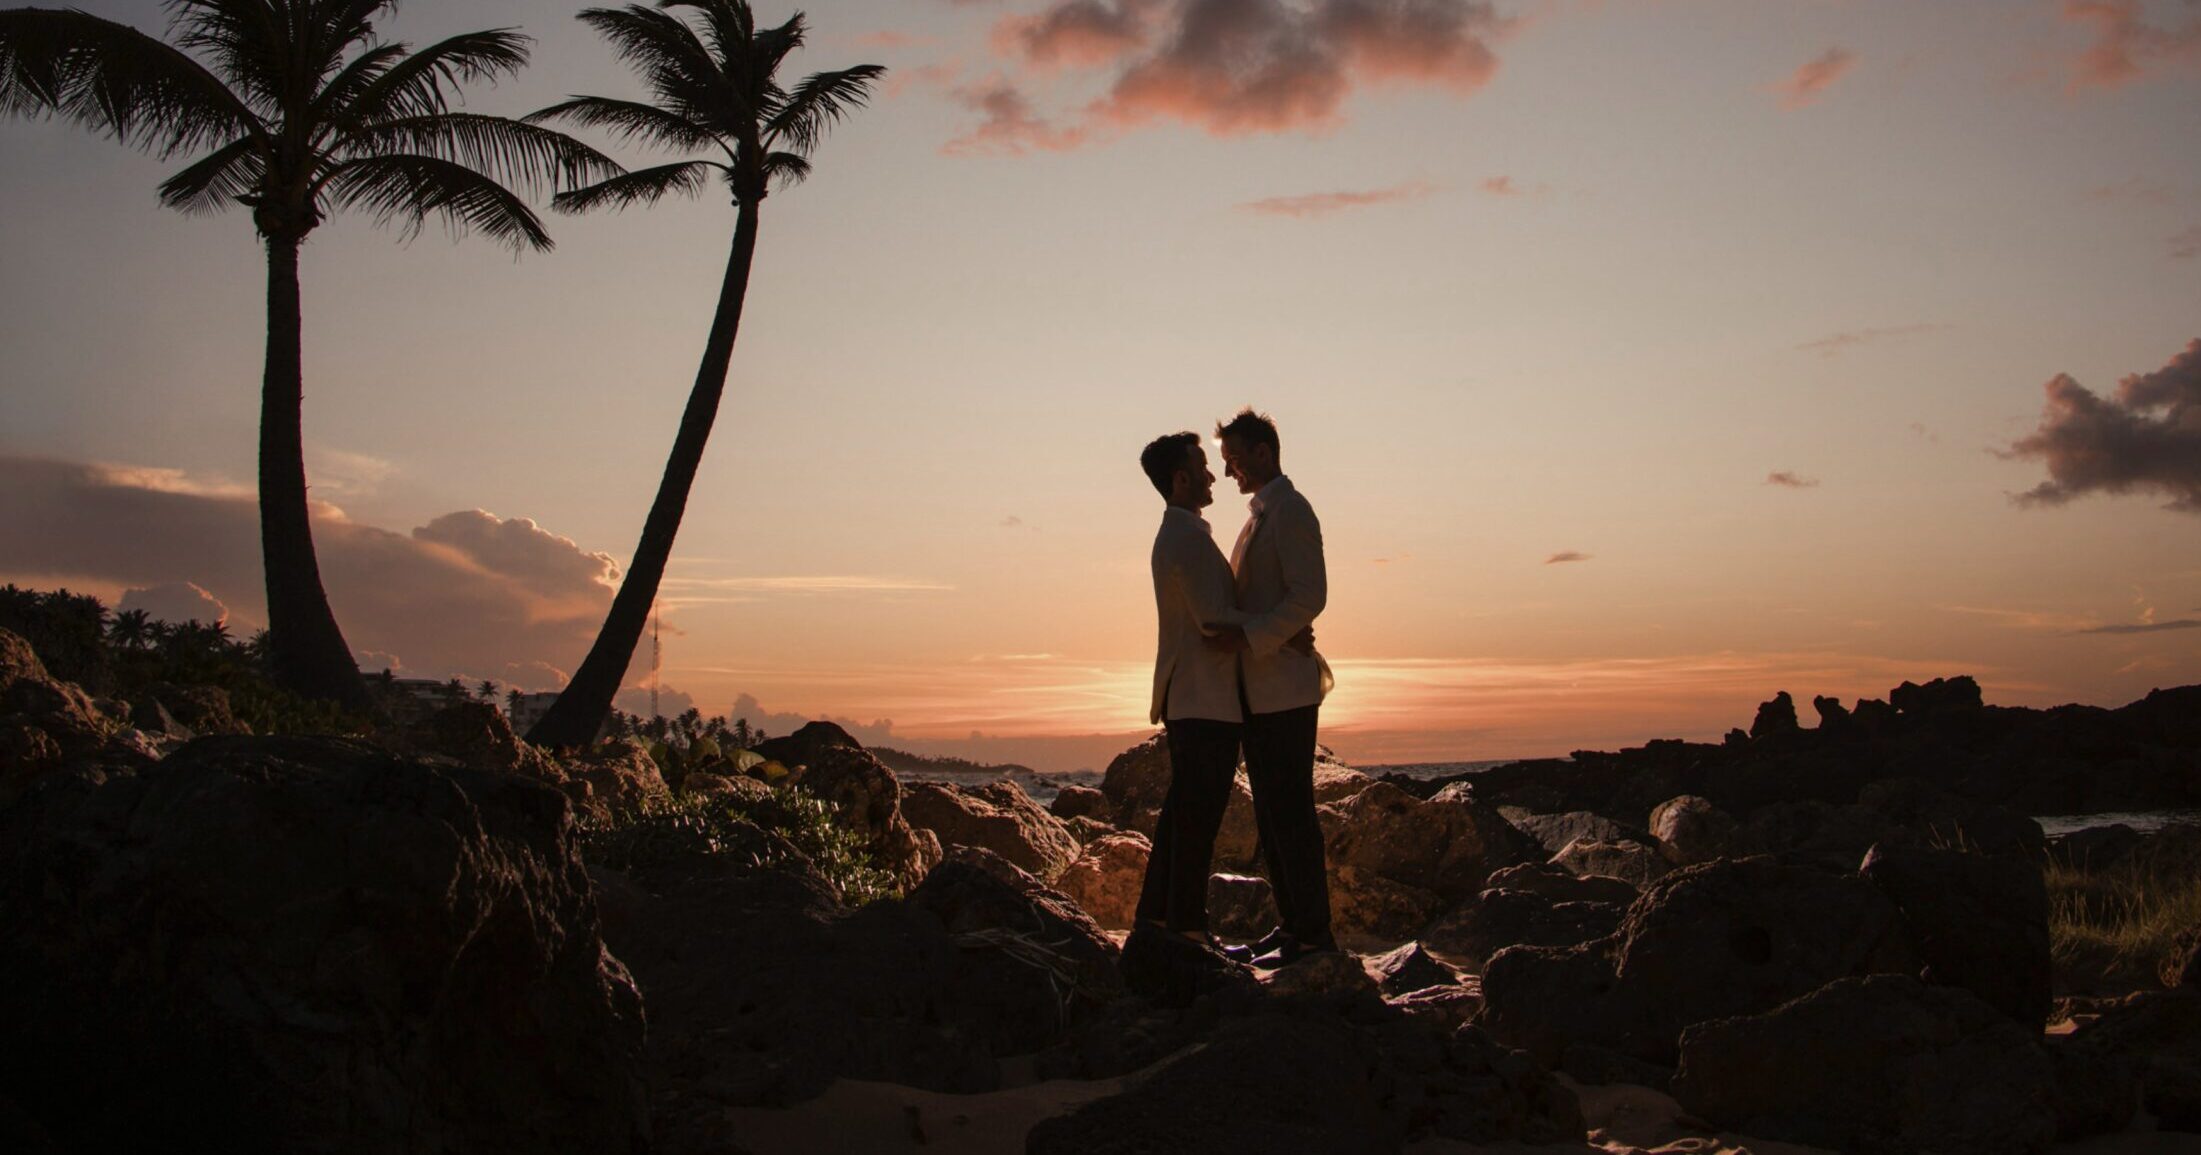 A couple captured during their destination wedding, standing on rocks at sunset with palm trees in the background.